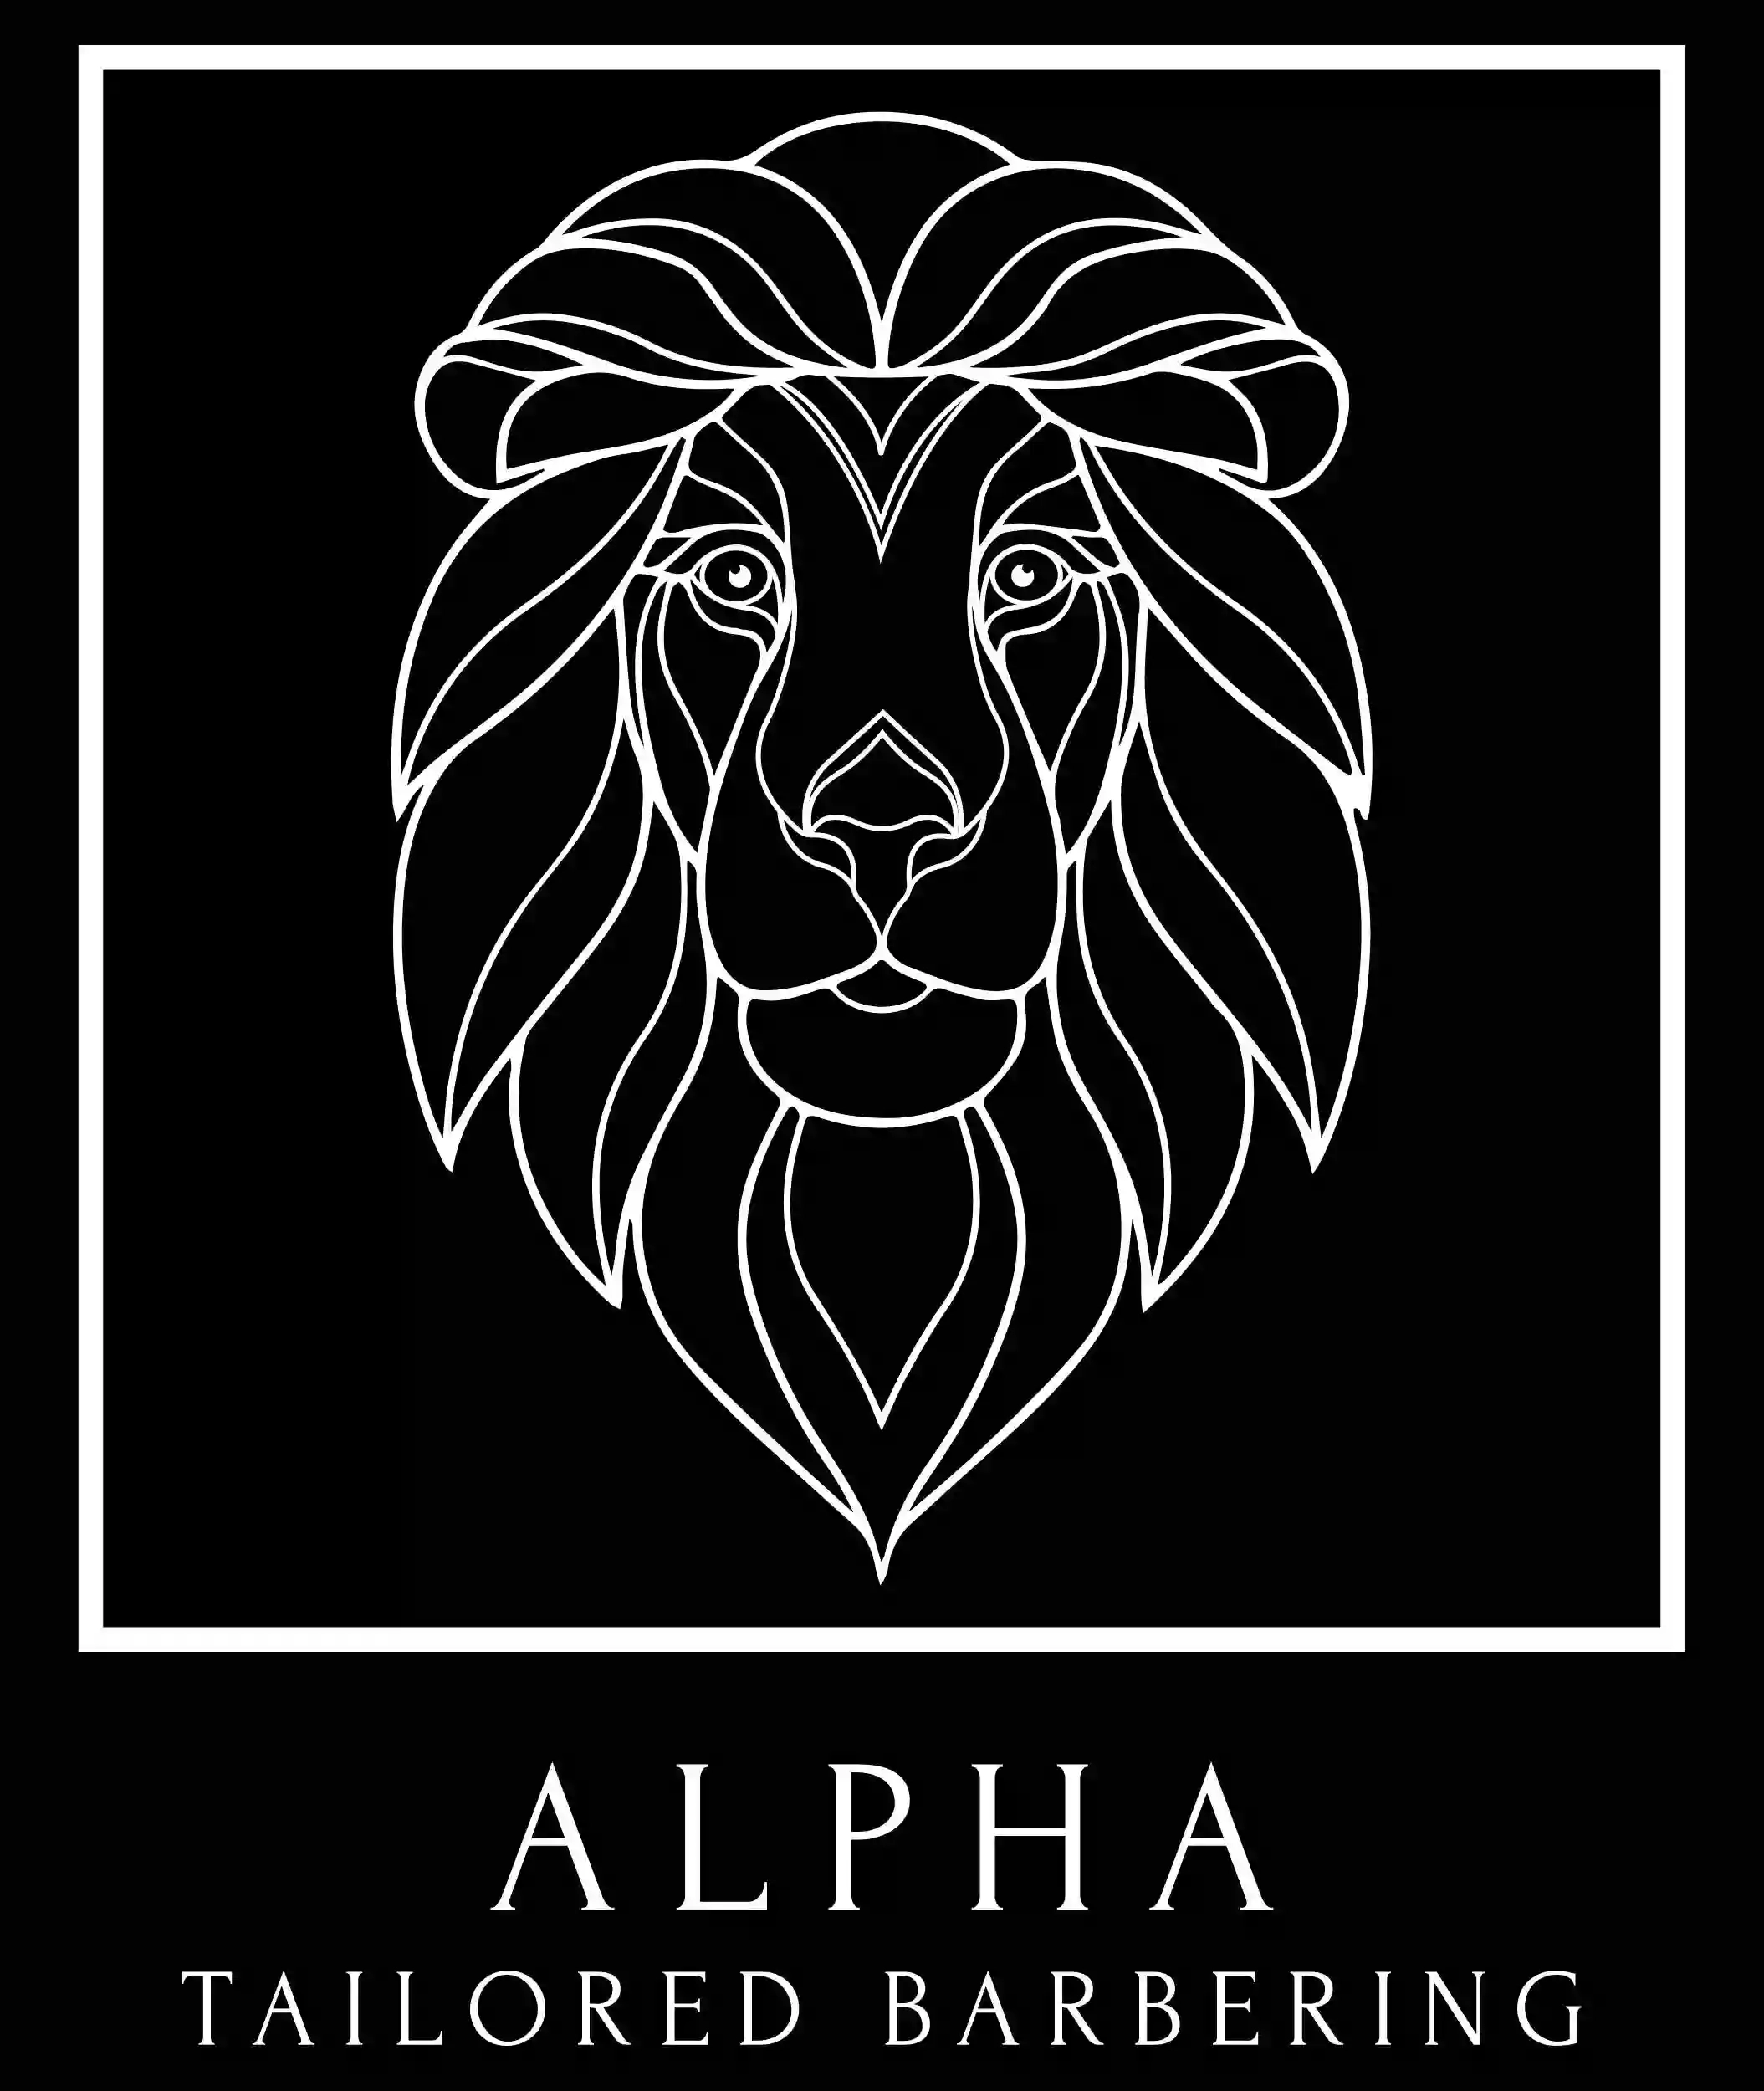 Alpha Tailored Barbering